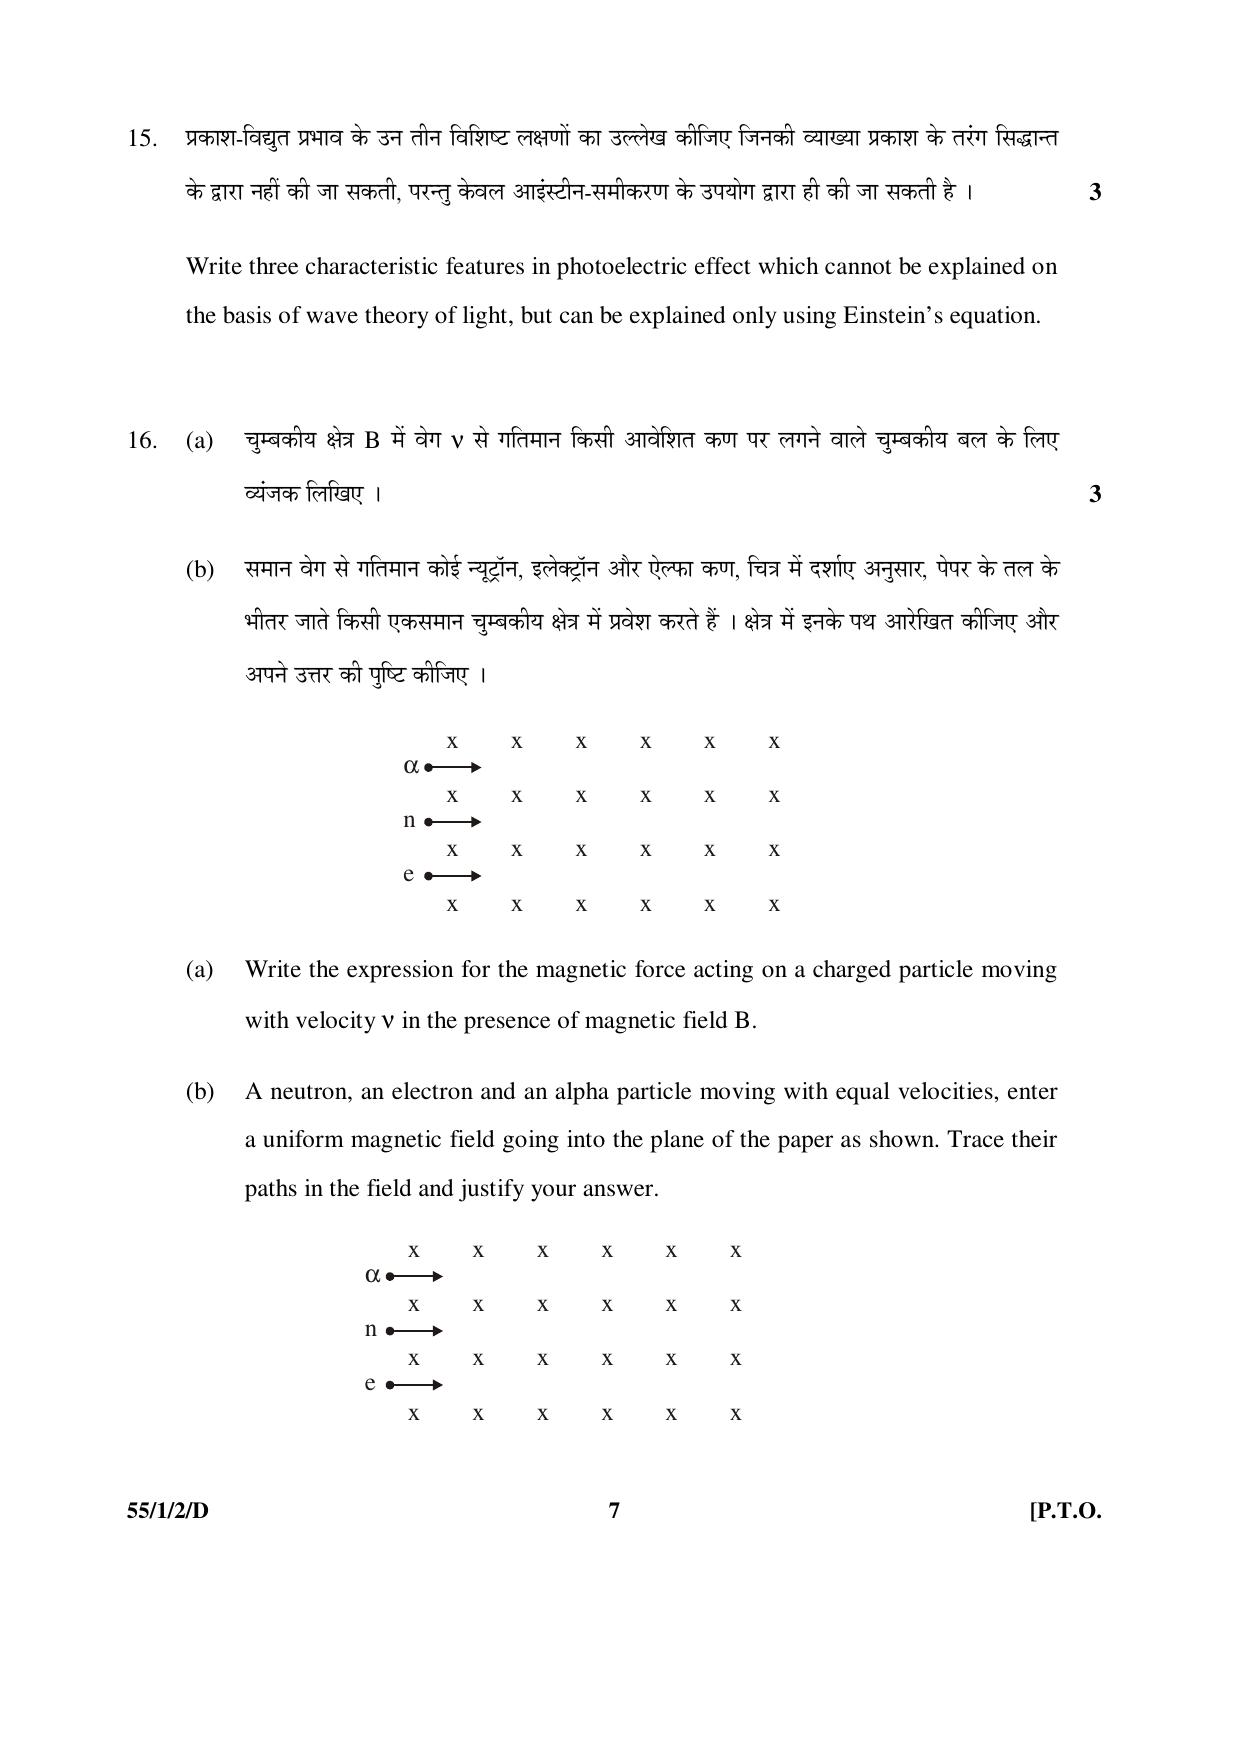 CBSE Class 12 55-1-2-D PHYSICS 2016 Question Paper - Page 7